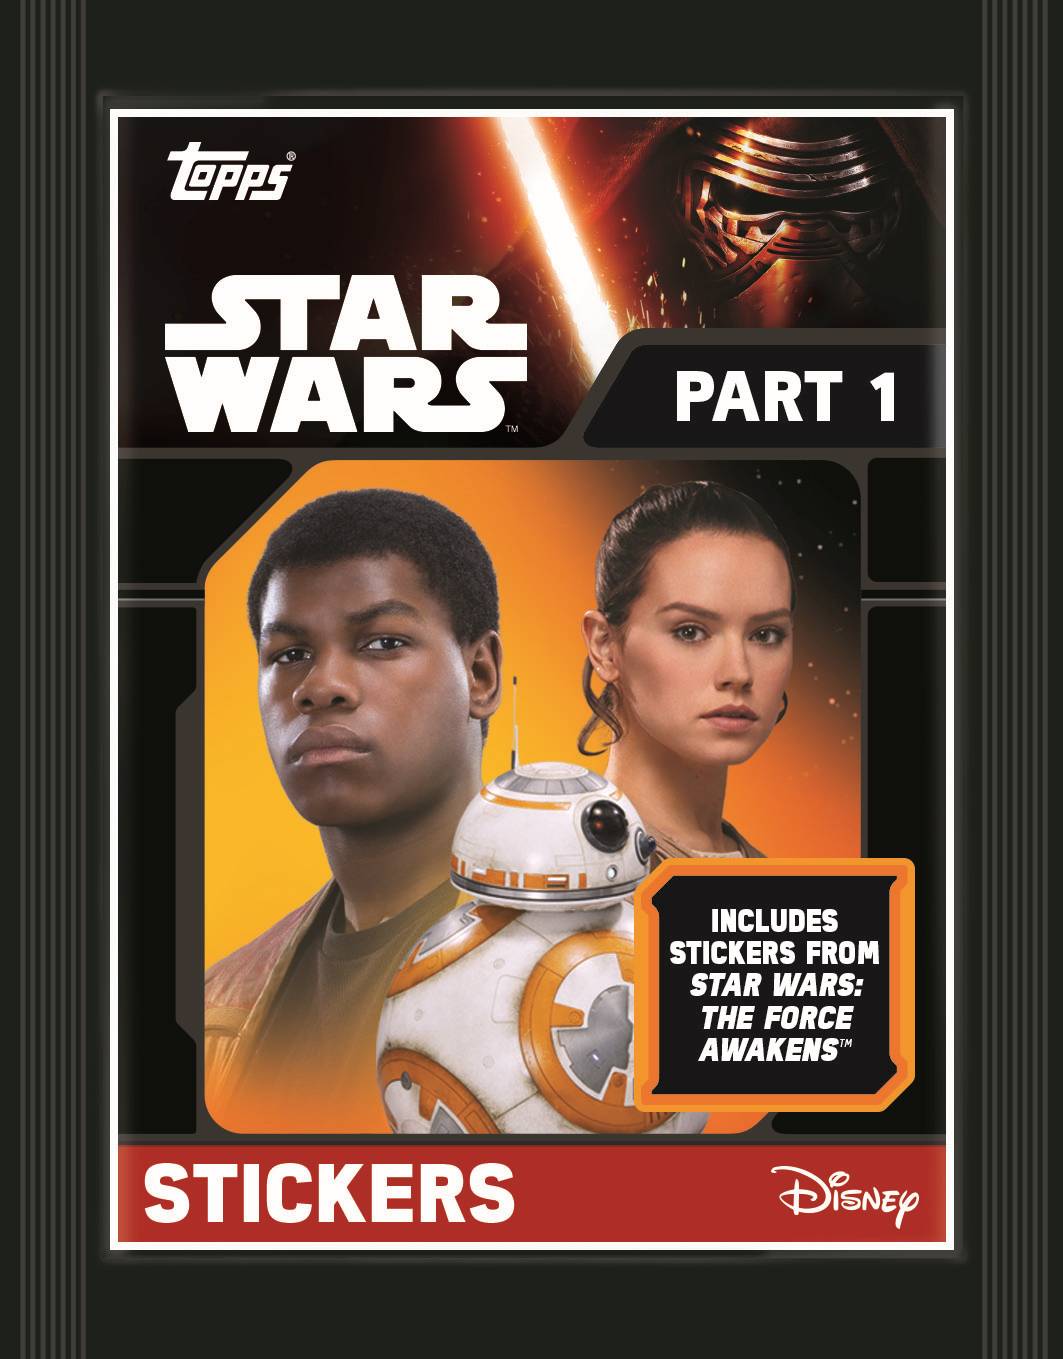 Topps launches new Star Wars collections